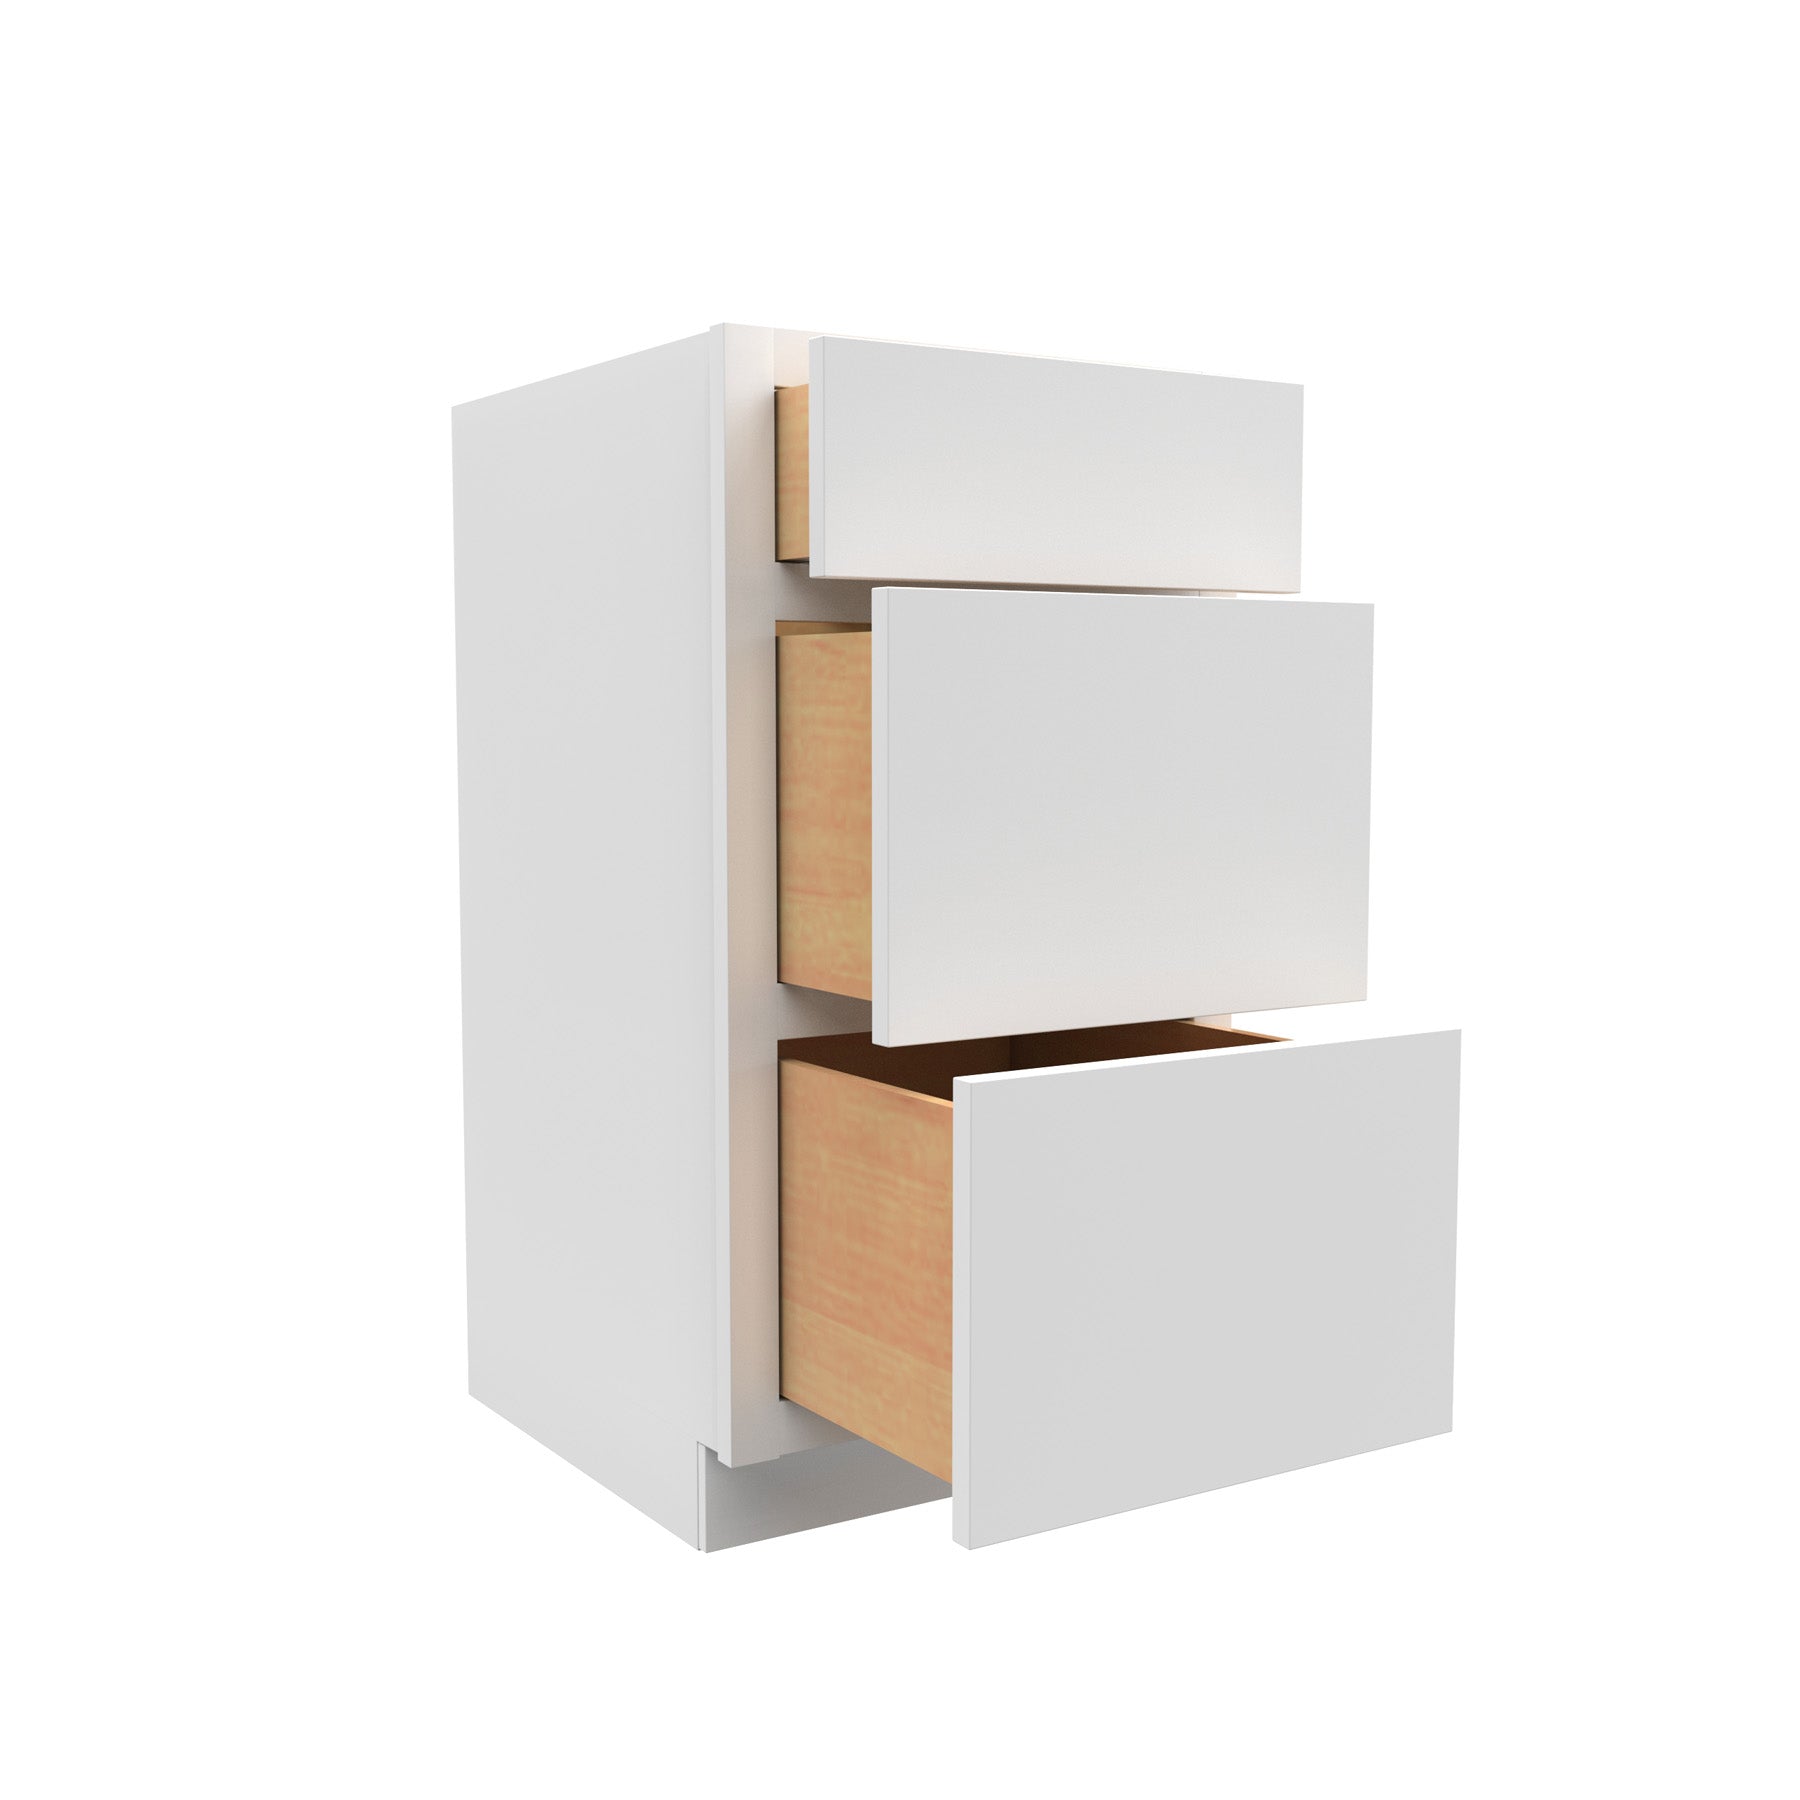 18 Inch Wide 3 Drawer Cabinet Vanity - Luxor White Shaker - Ready To Assemble, 18"W x 34.5"H x 21"D